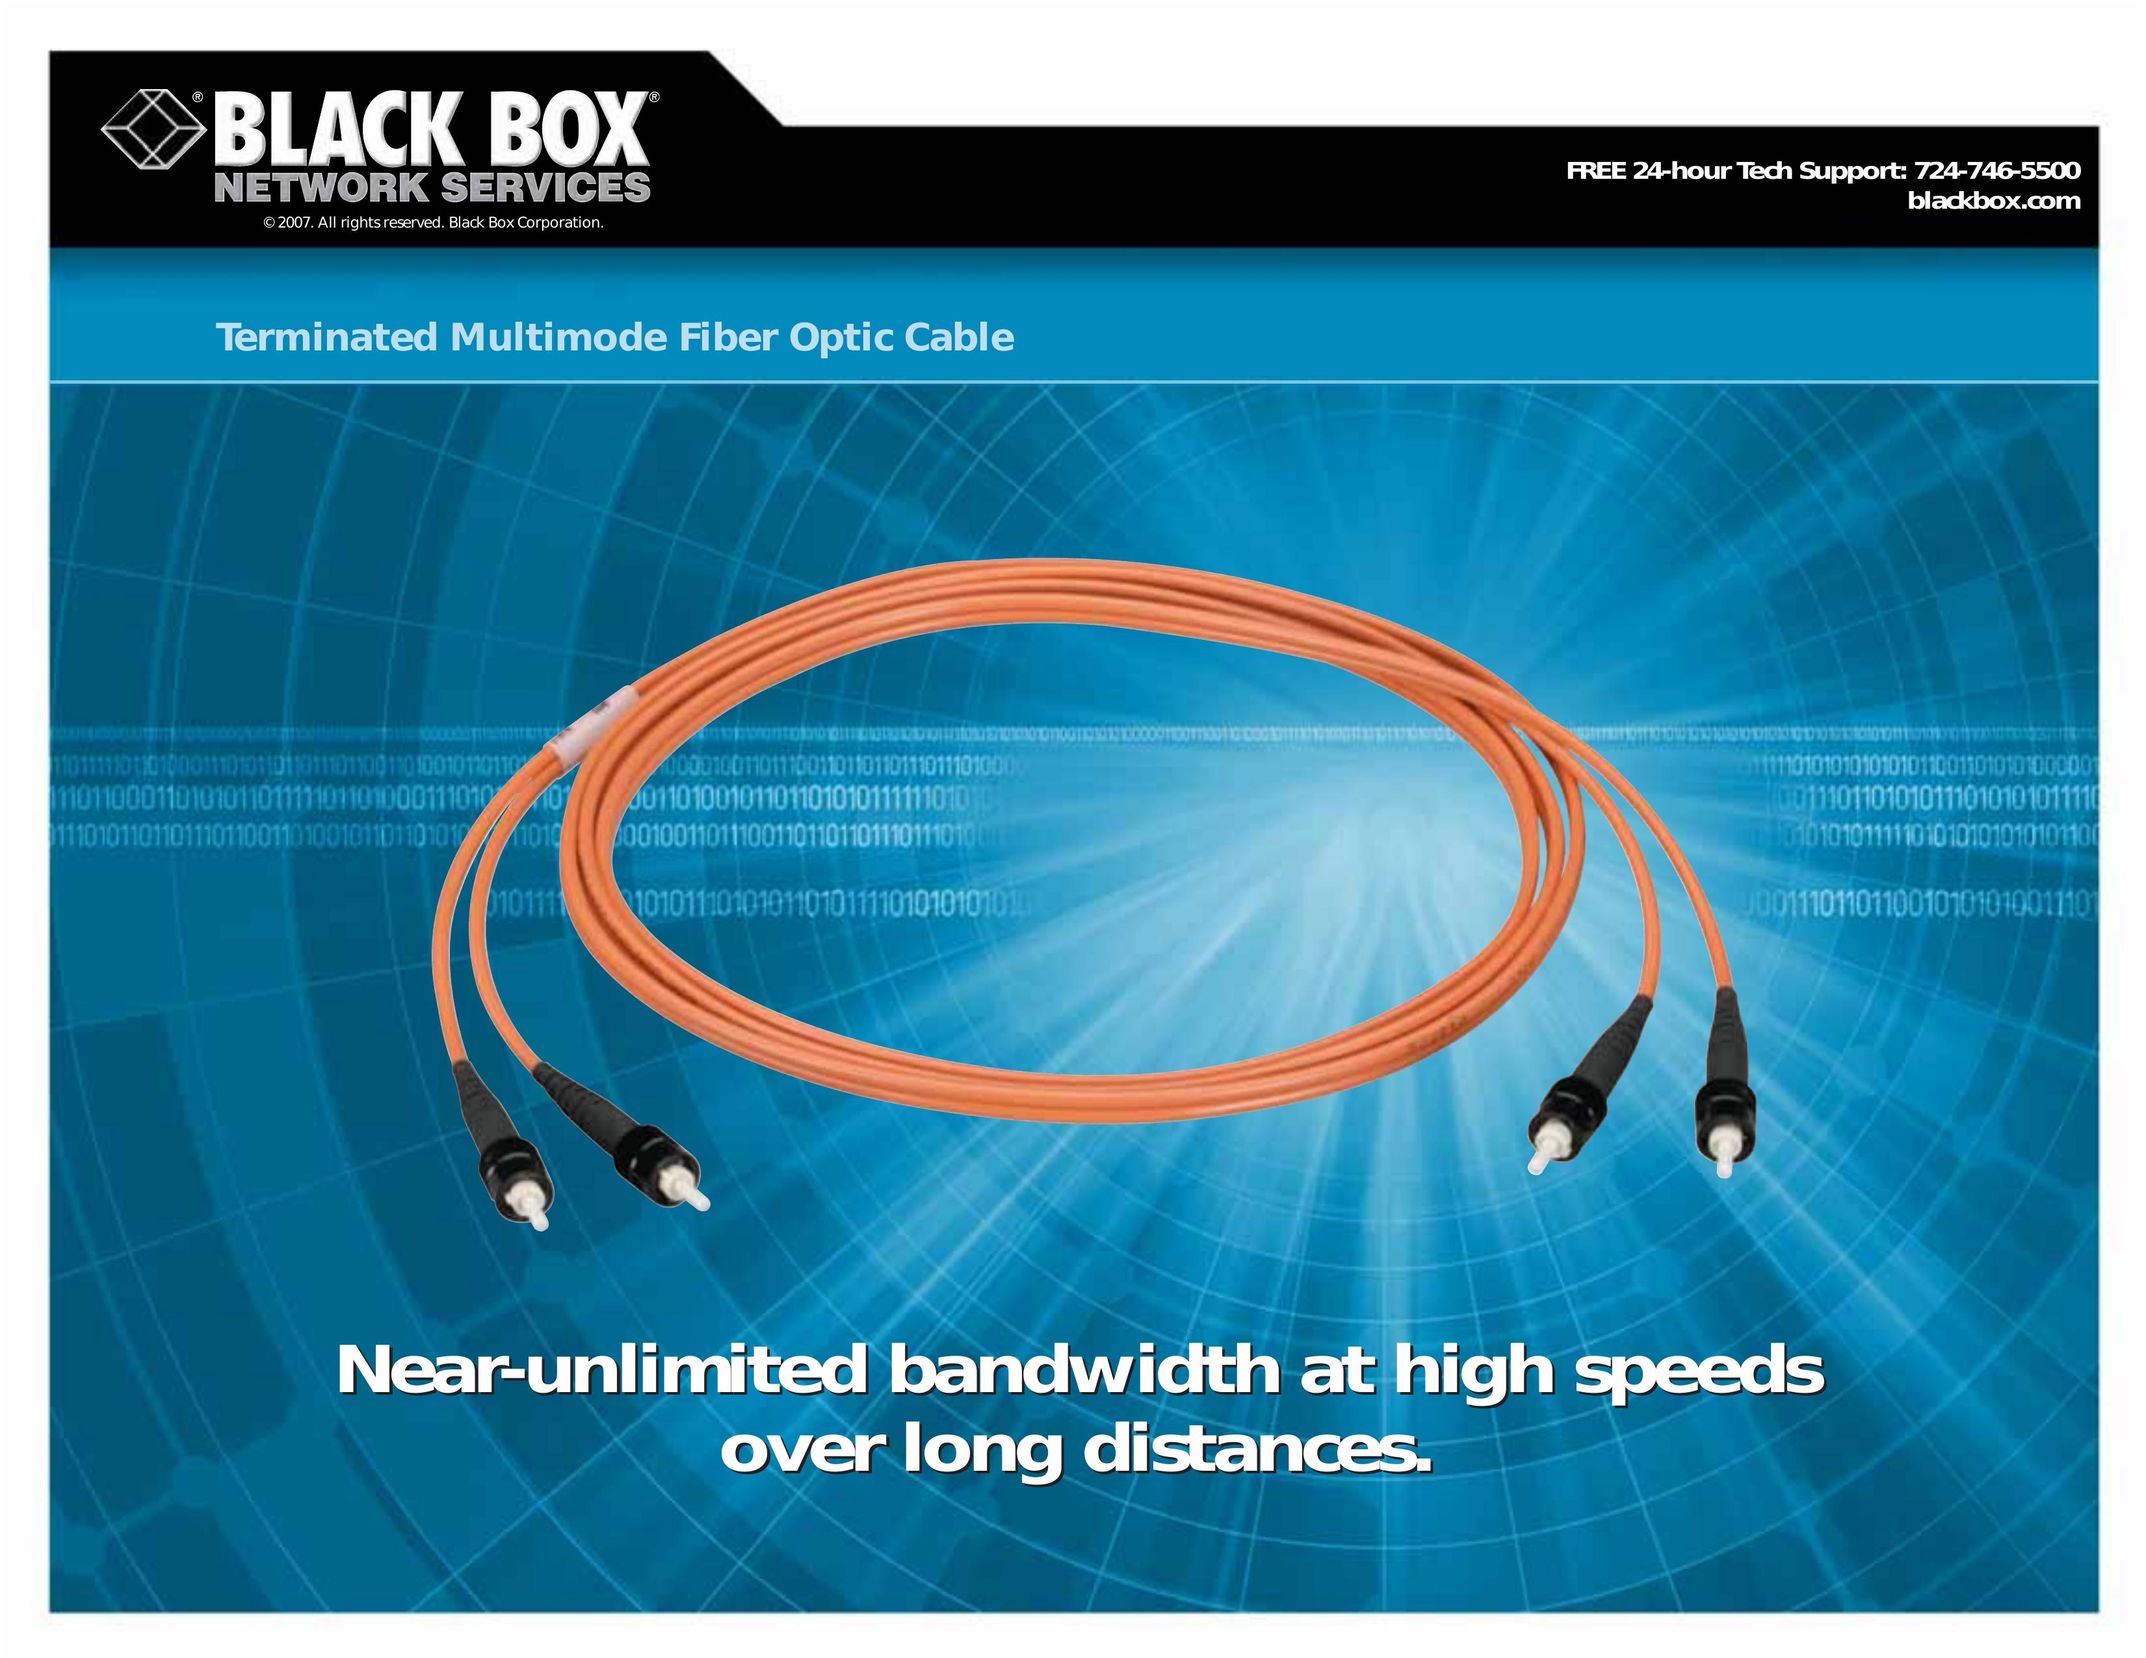 Black Box Terminated Multimode Fiber Optic Cable Stereo System User Manual